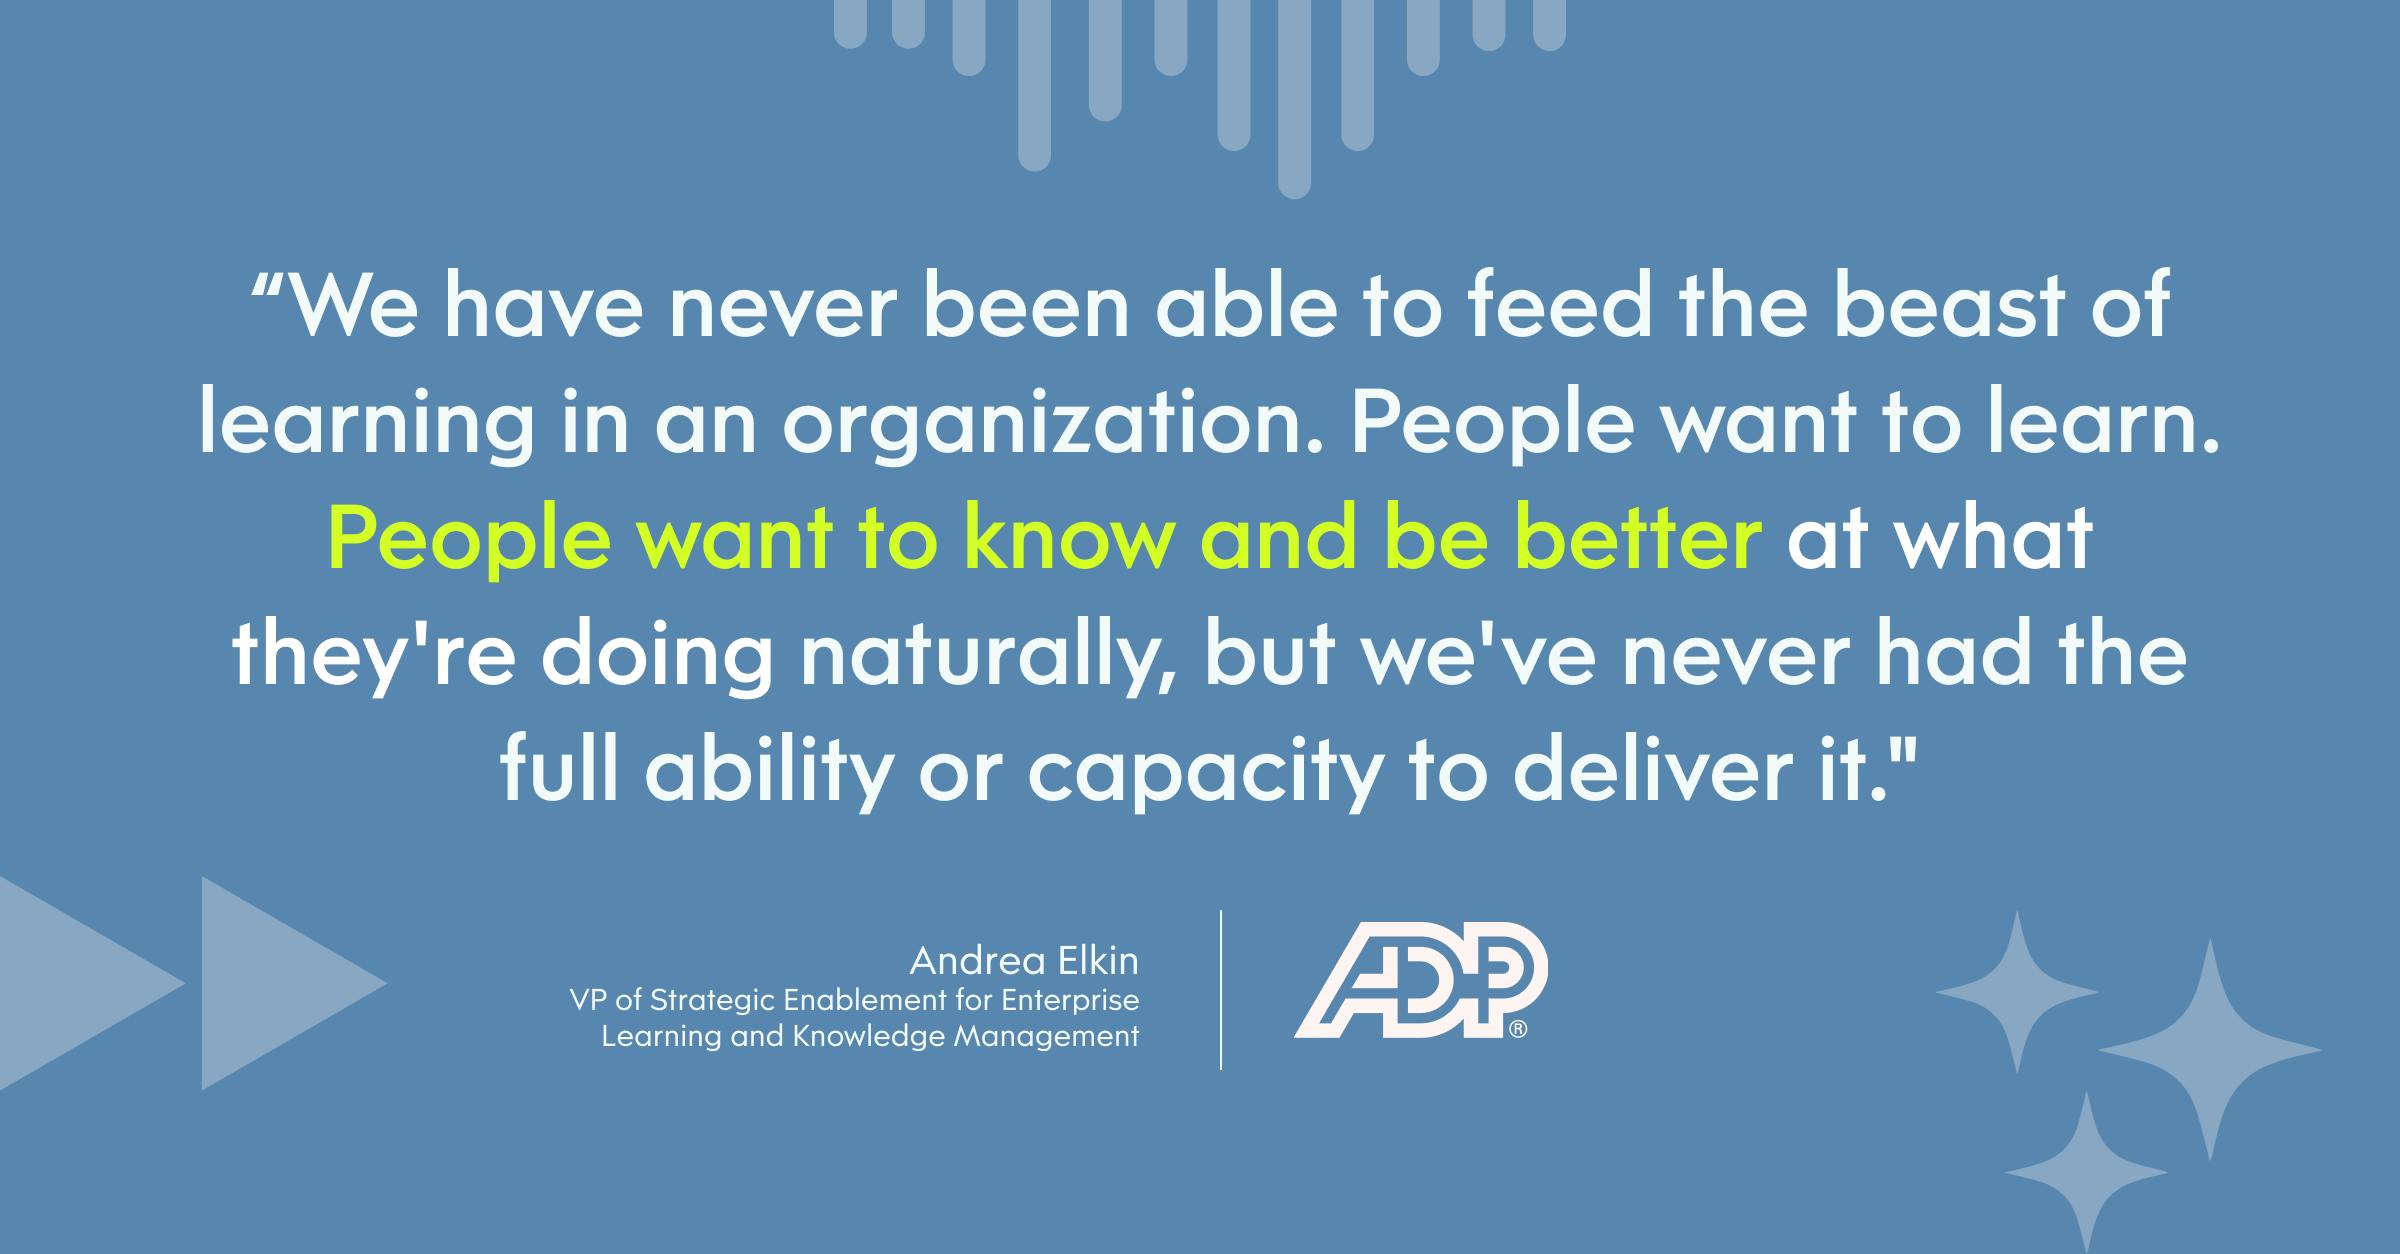 “We have never been able to feed the beast of learning in an organization. People want to learn. People want to know and be better at what they're doing naturally, but we've never had the full ability or capacity to deliver it.